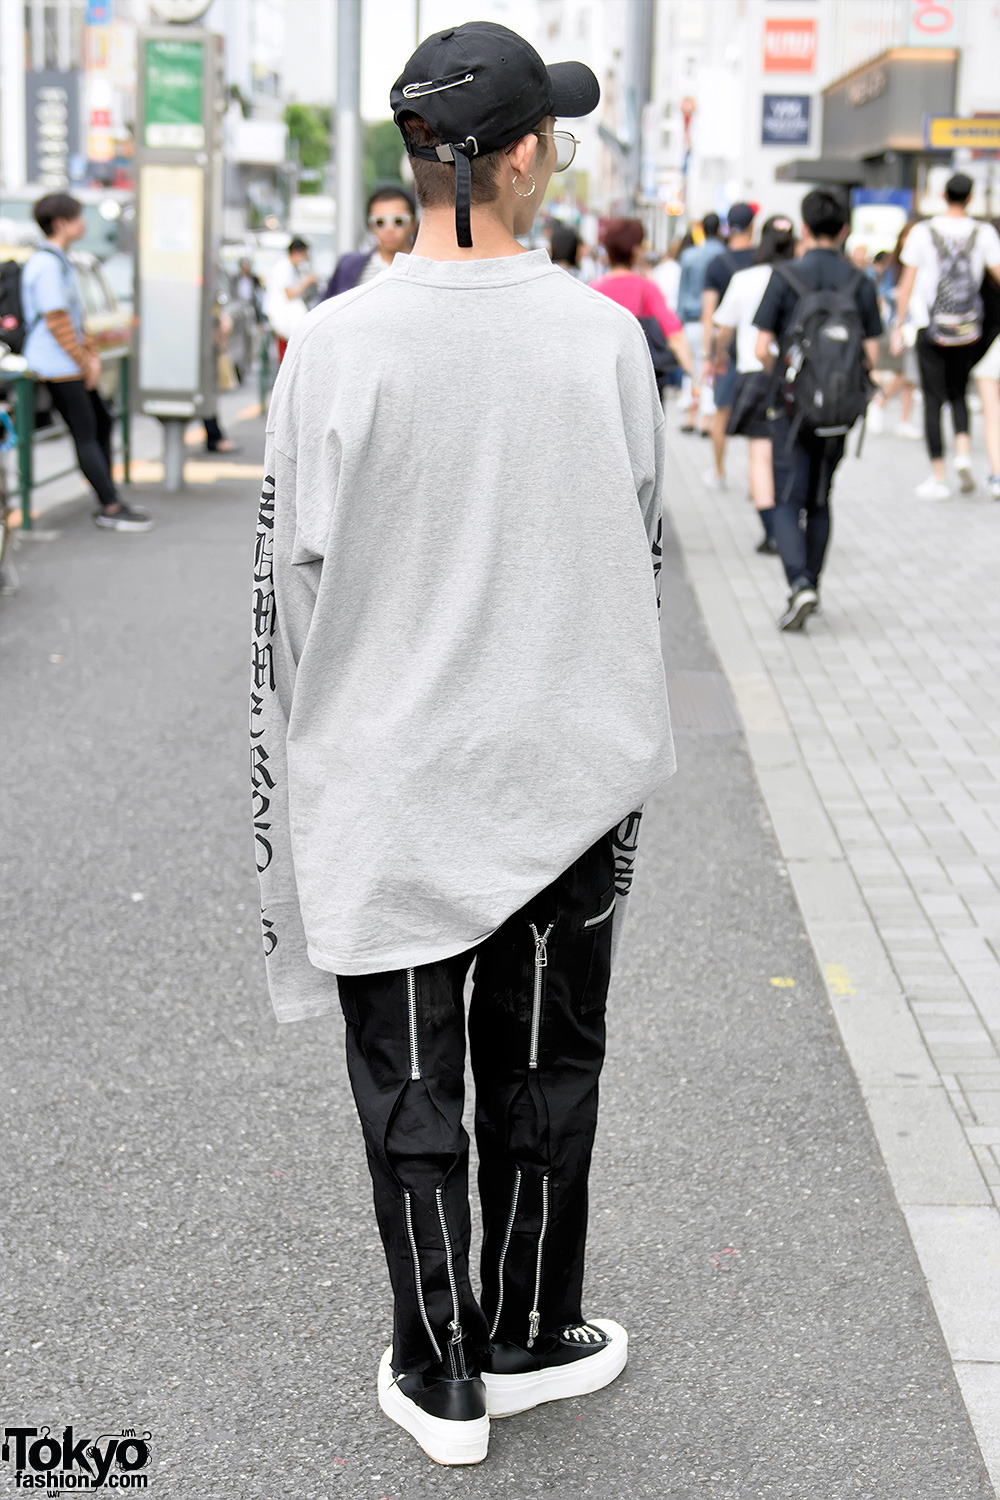 tokyo-fashion:  Sench1 and Cham on the street in Harajuku. Sench1 is wearing a Vetements